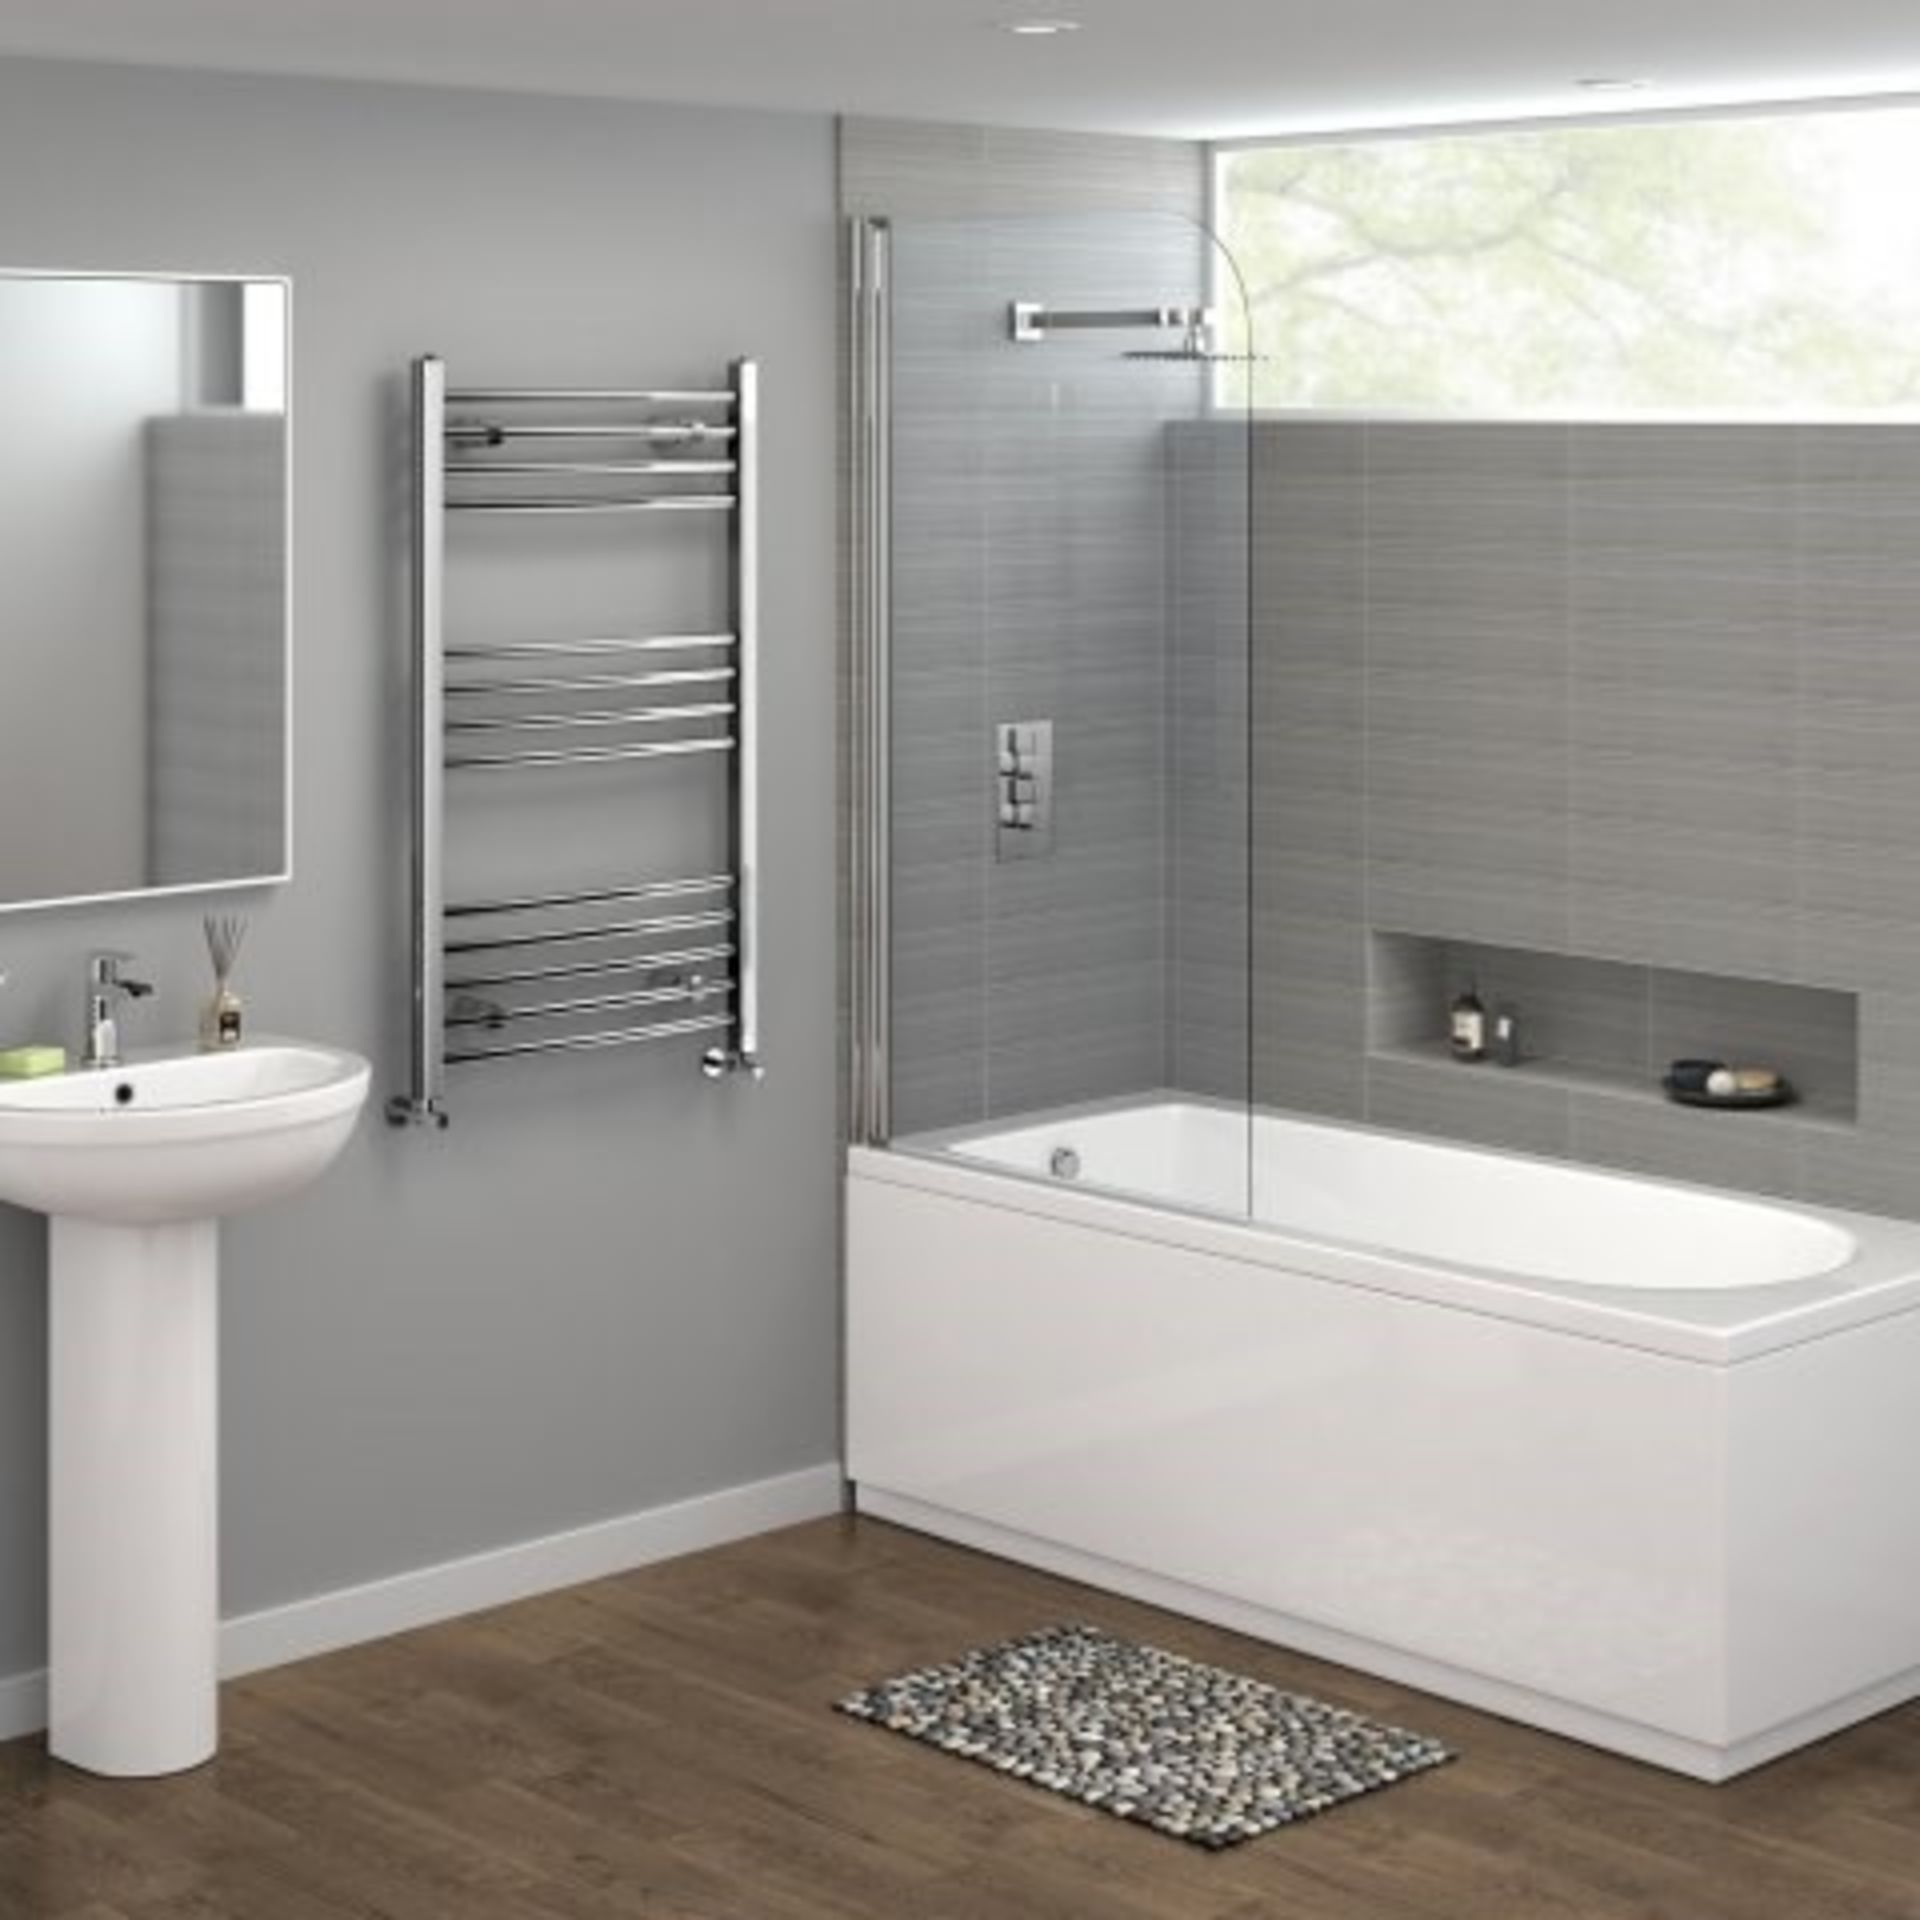 BRAND NEW BOXED 1200x600mm - 20mm Tubes - RRP £219.99.Chrome Curved Rail Ladder Towel Radiator... - Image 2 of 3